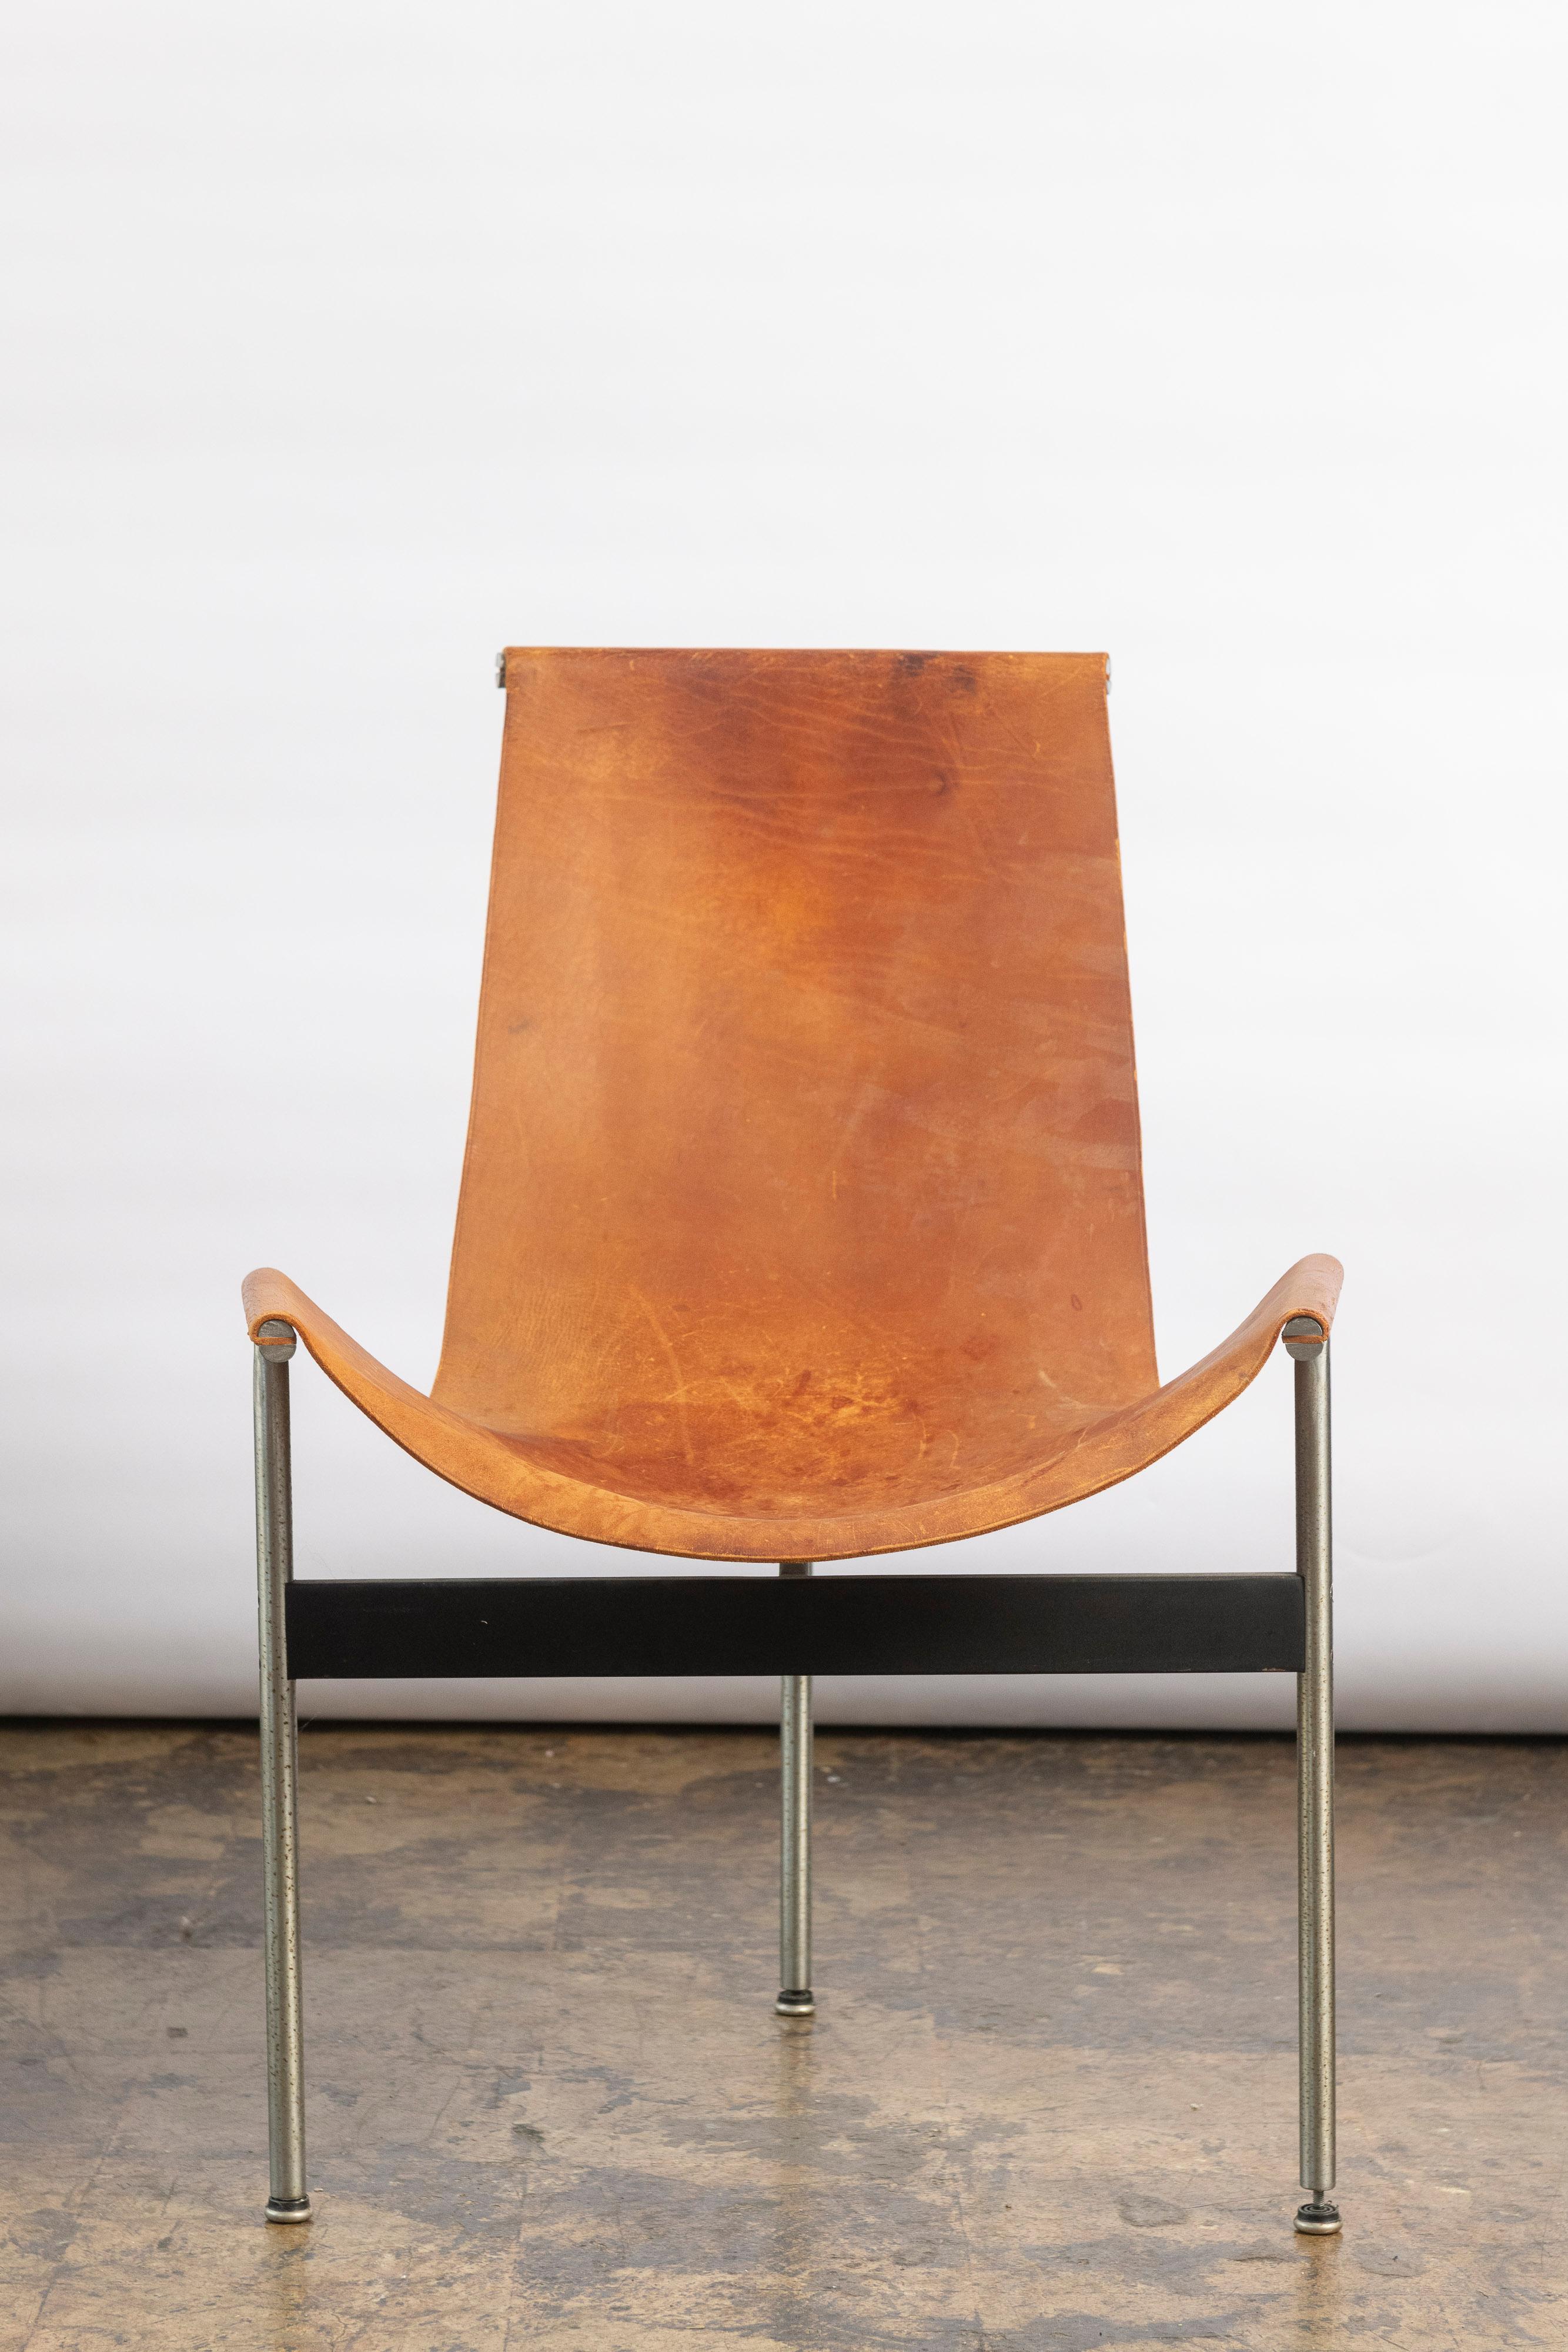 William Katavolos, Ross Littell, Douglas Kelley, single T-chair, chrome-plated steel, enameled steel, cognac leather, United States, designed in 1952. Three T-shaped steel legs hold the cognac leather in place. The original leather is connected to